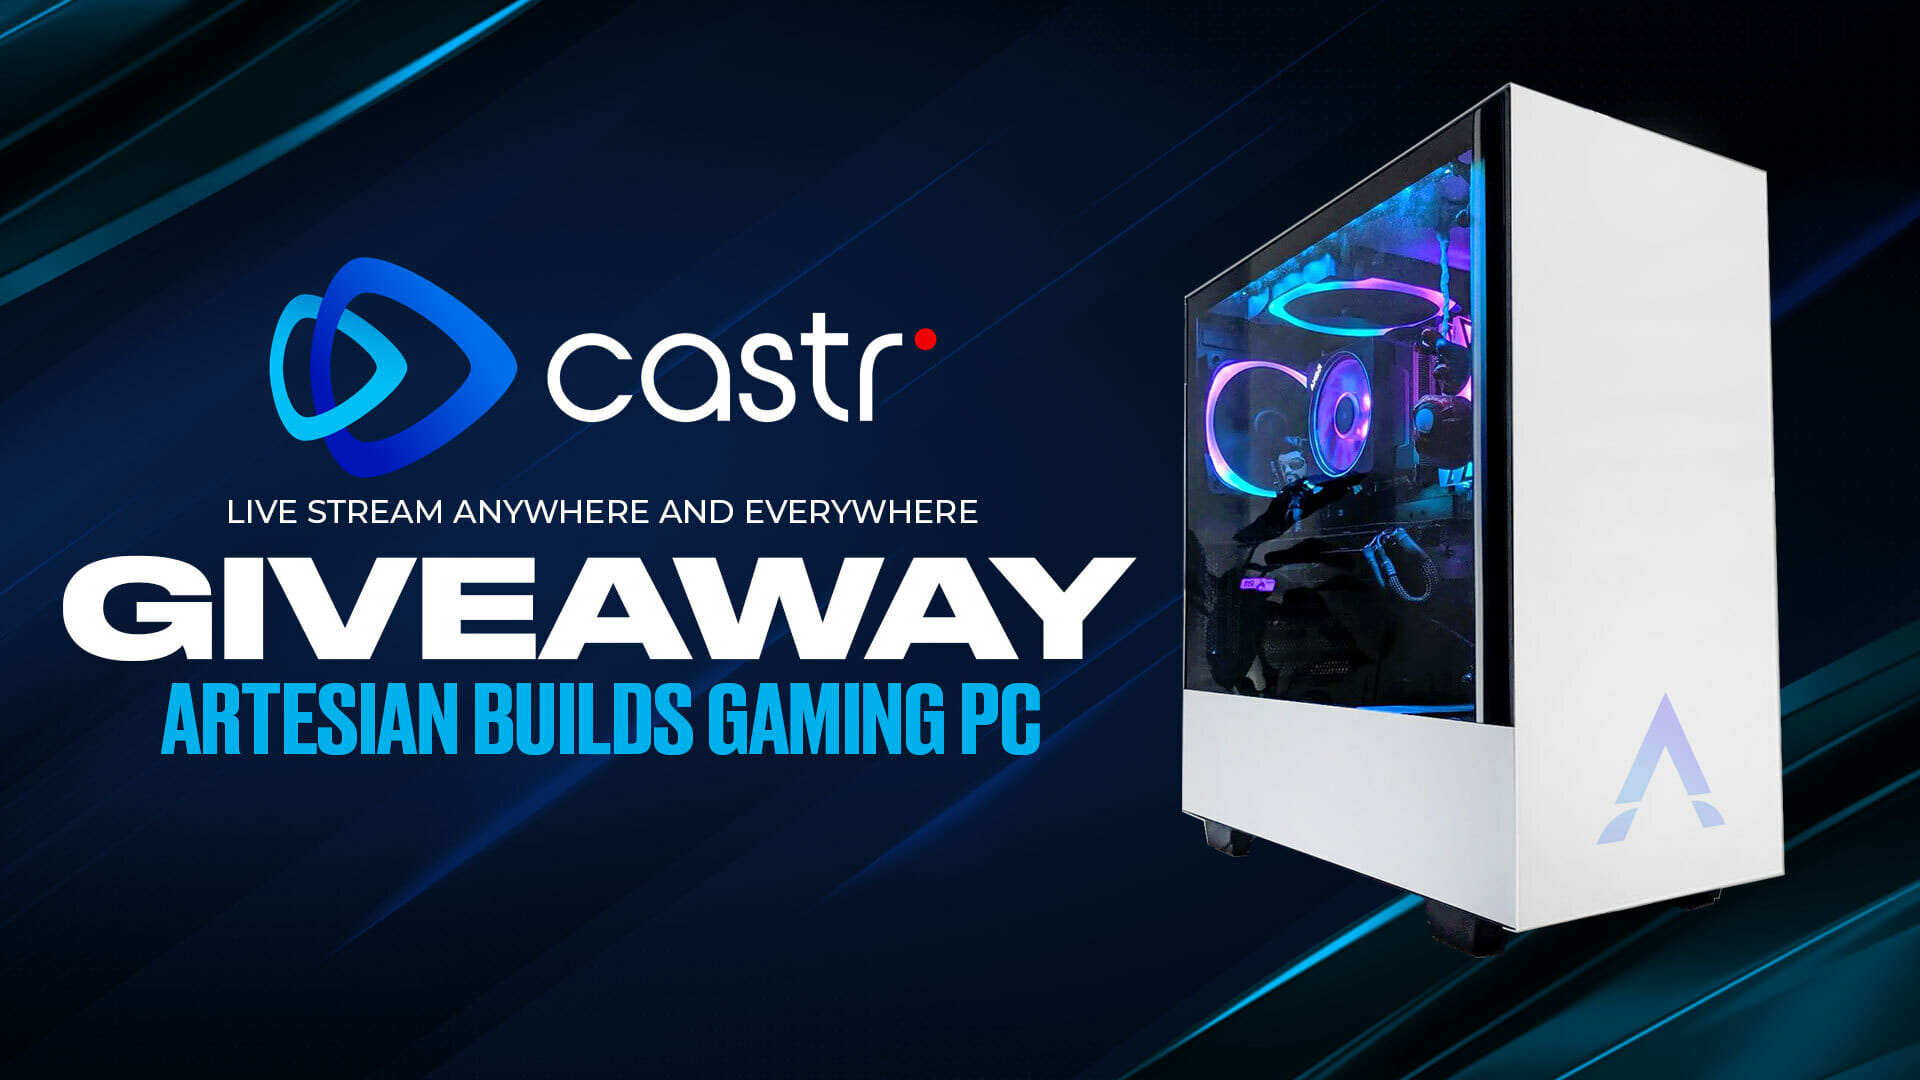 Castr Live Video Streaming PC Giveaway: Enter Now!